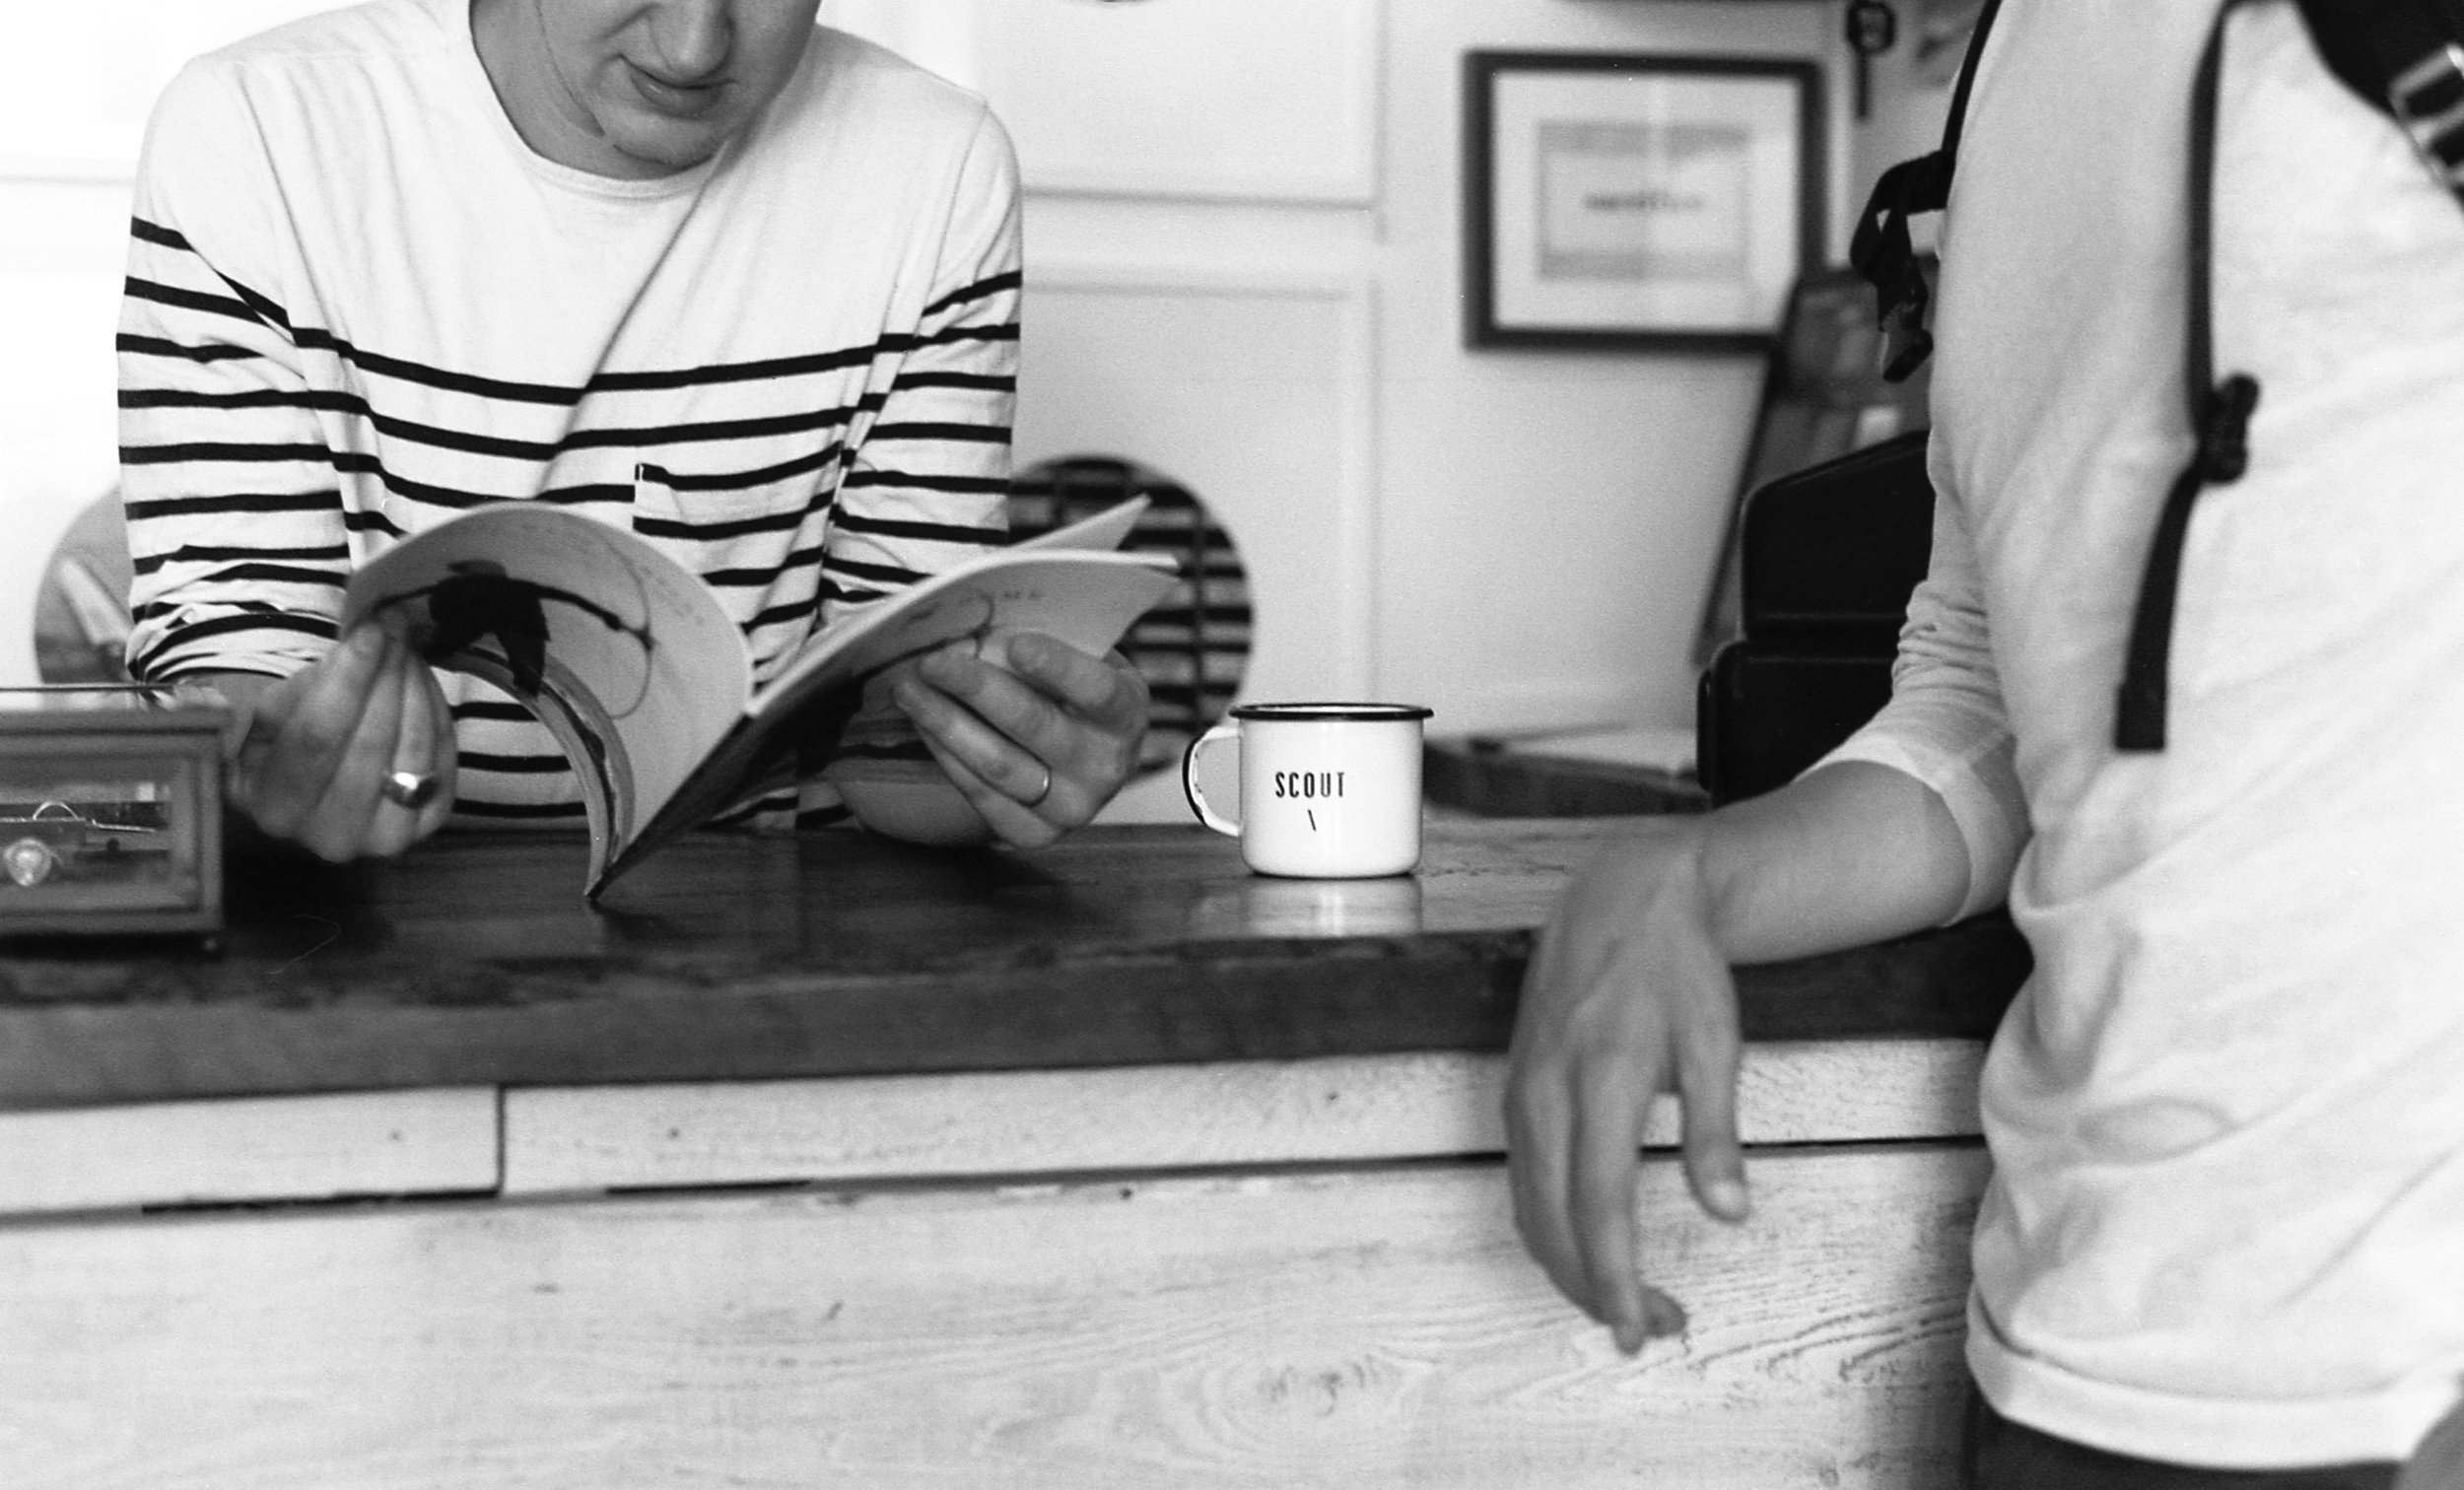 Two people lean against a coffee bar, one flips through a magazine